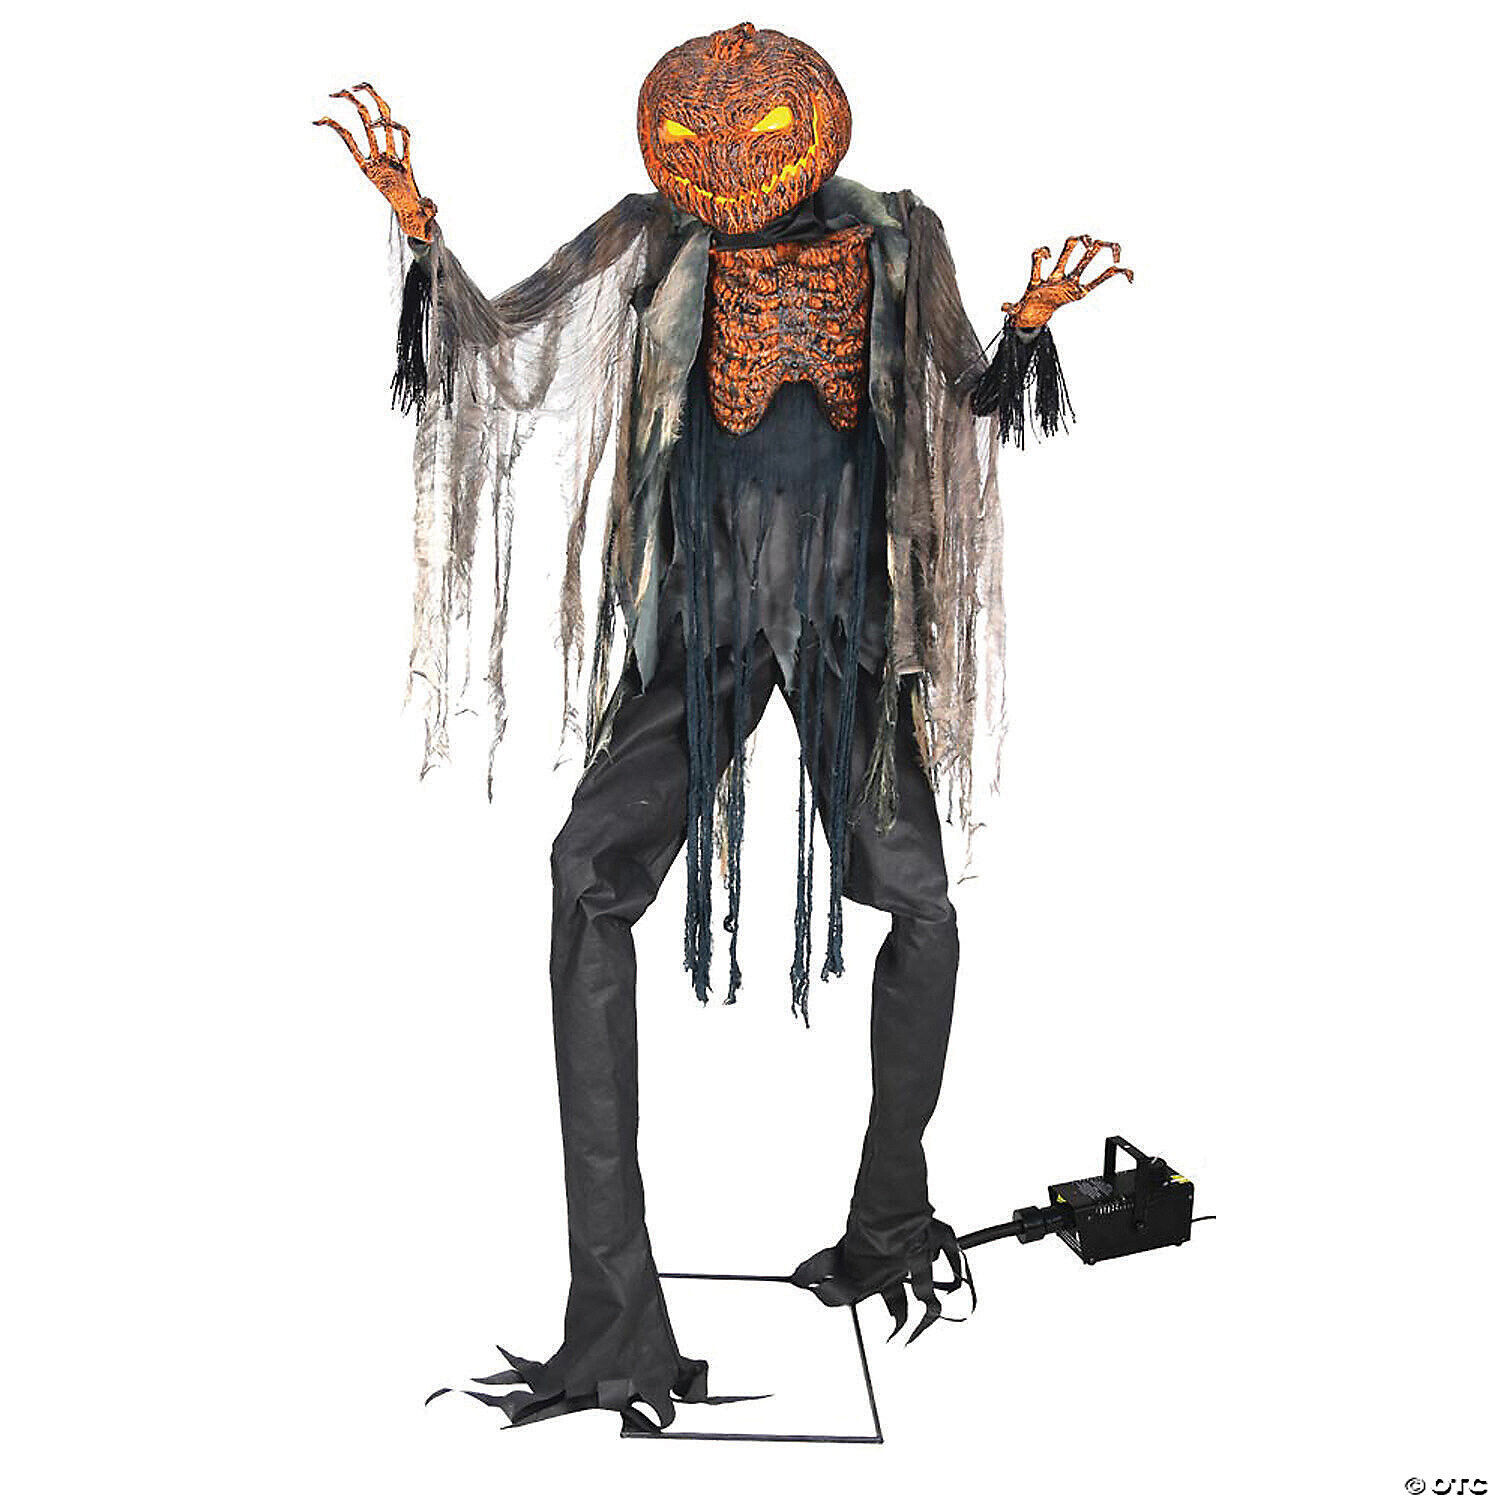 HALLOWEEN 7 FT ANIMATED SCORCHED SCARECROW PUMPKIN MAN PROP HAS FOGGER FOG 400W